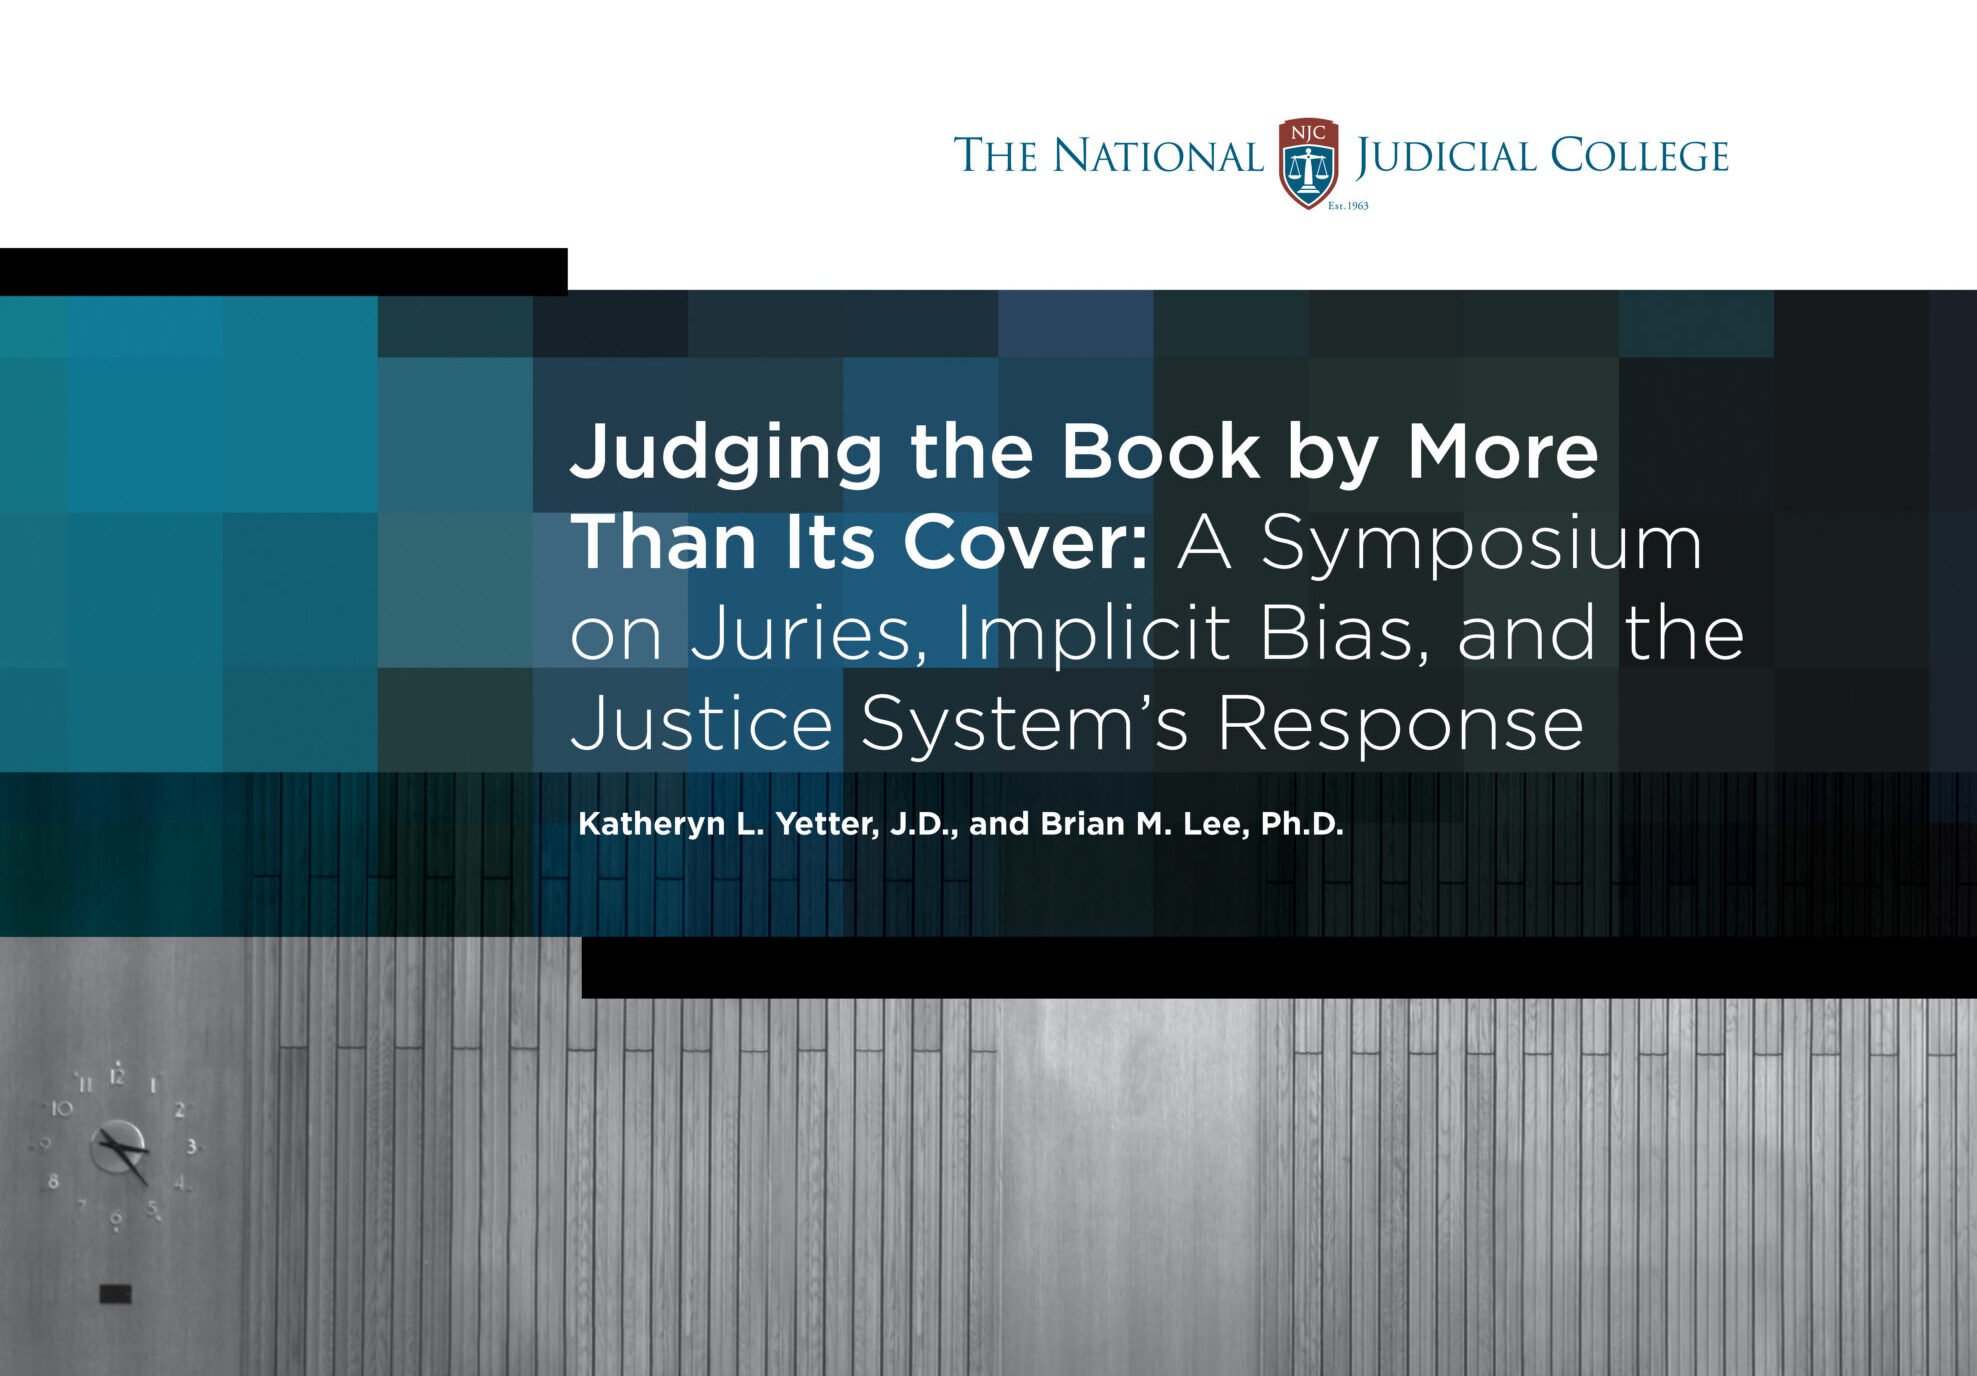 Cover of the white paper on implicit bias and juries